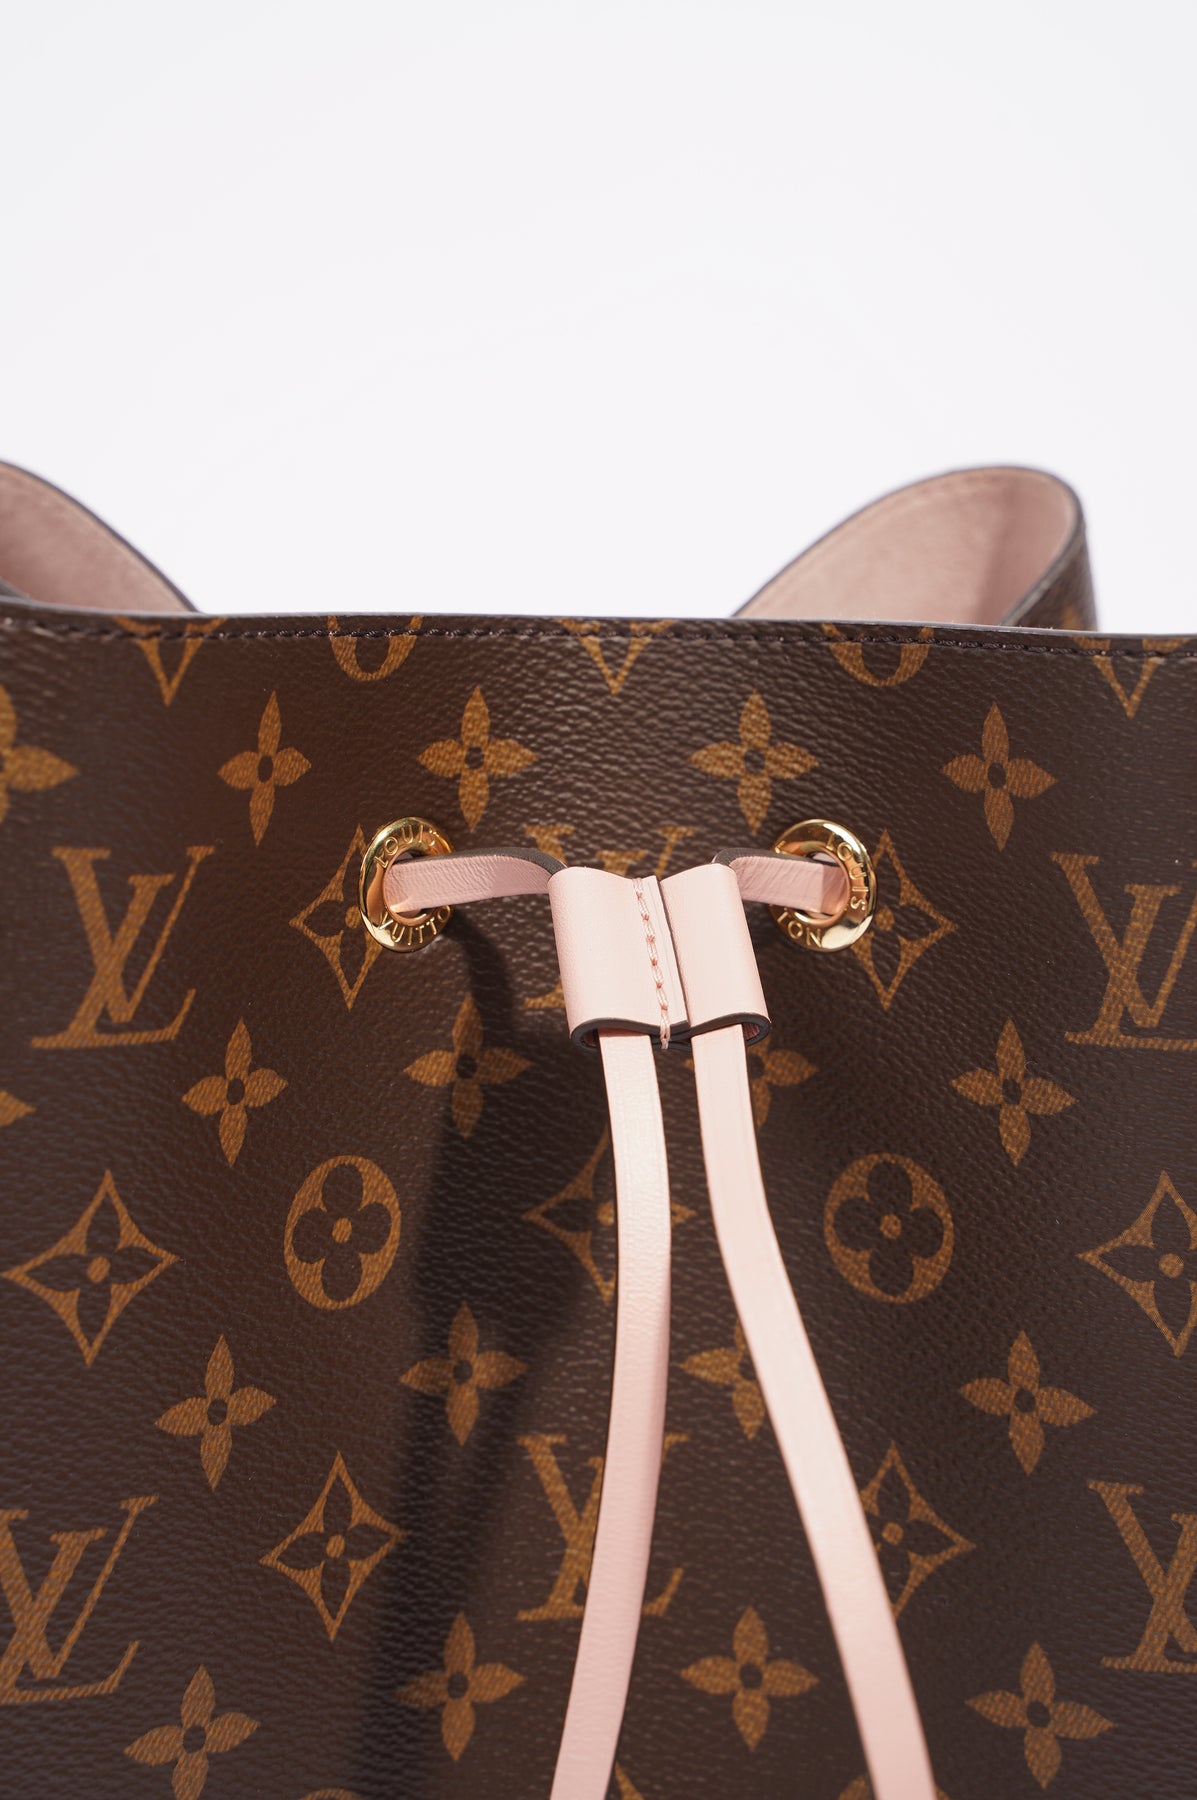 Tutorial : Making A Strap Handle for LOUISVUITTON Neonoe, Leather Craft 